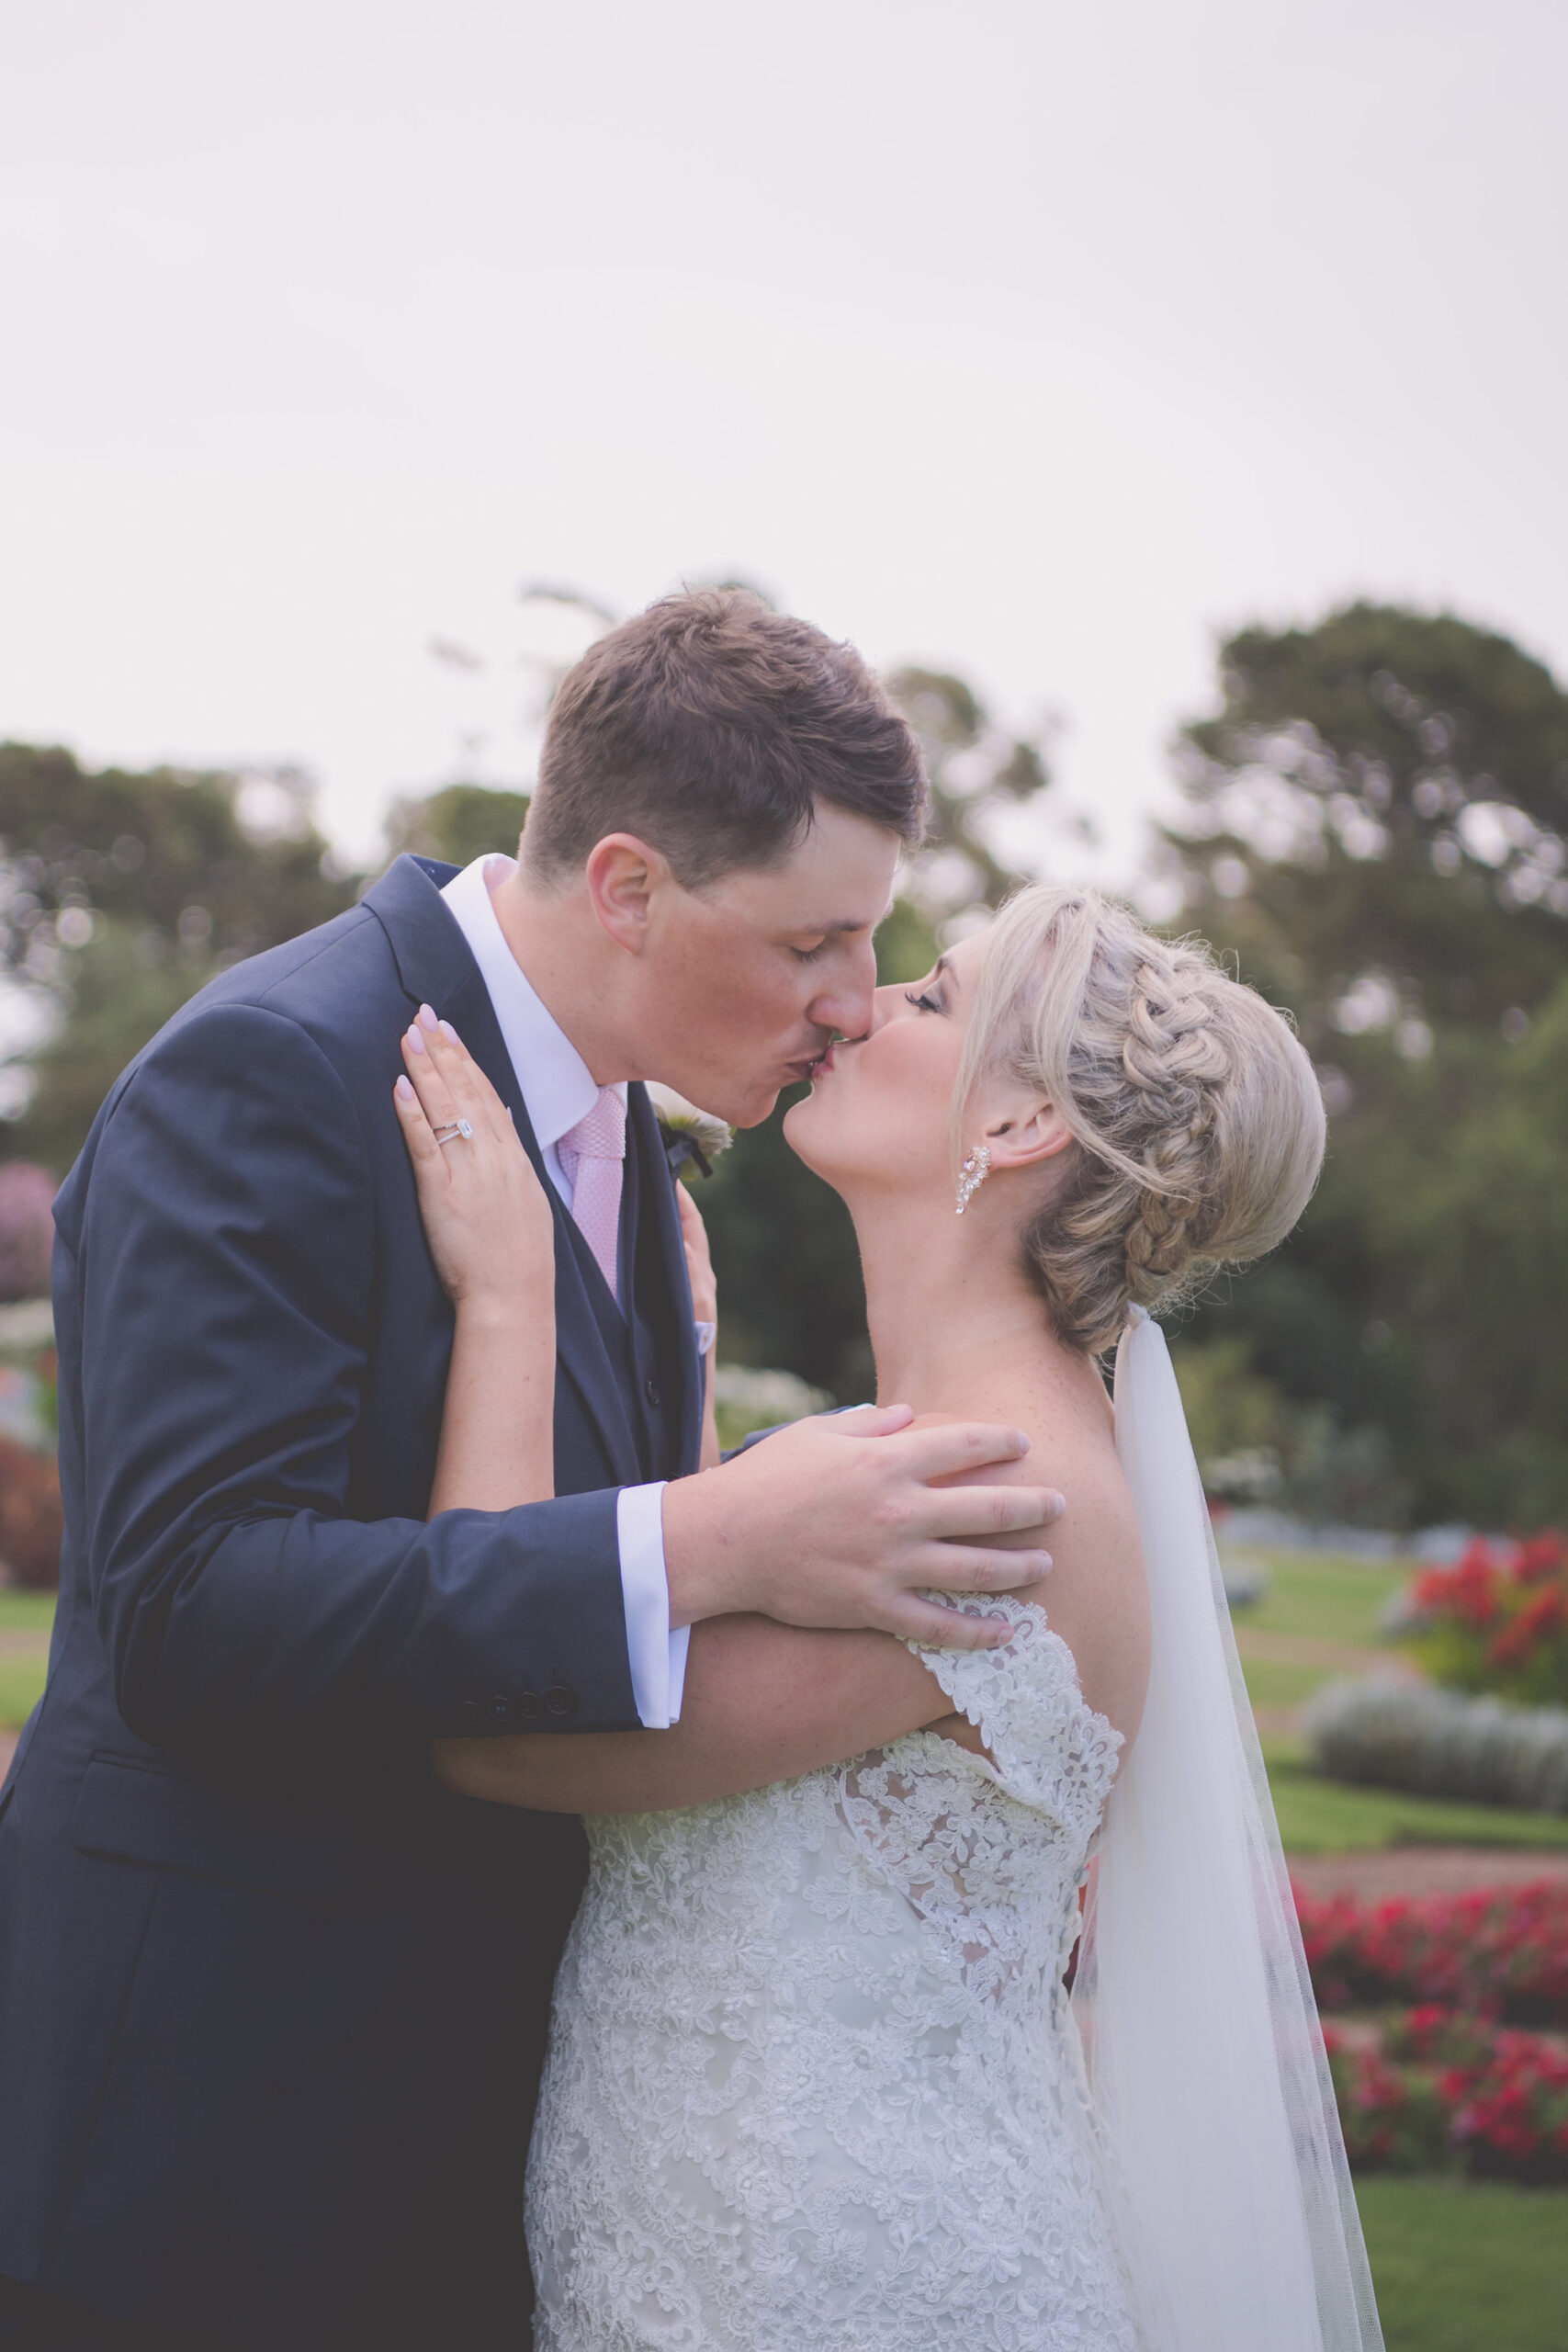 Alicia_Lachlan_Classic-Elegant-Wedding_Pauset-the-Moment_SBS_030